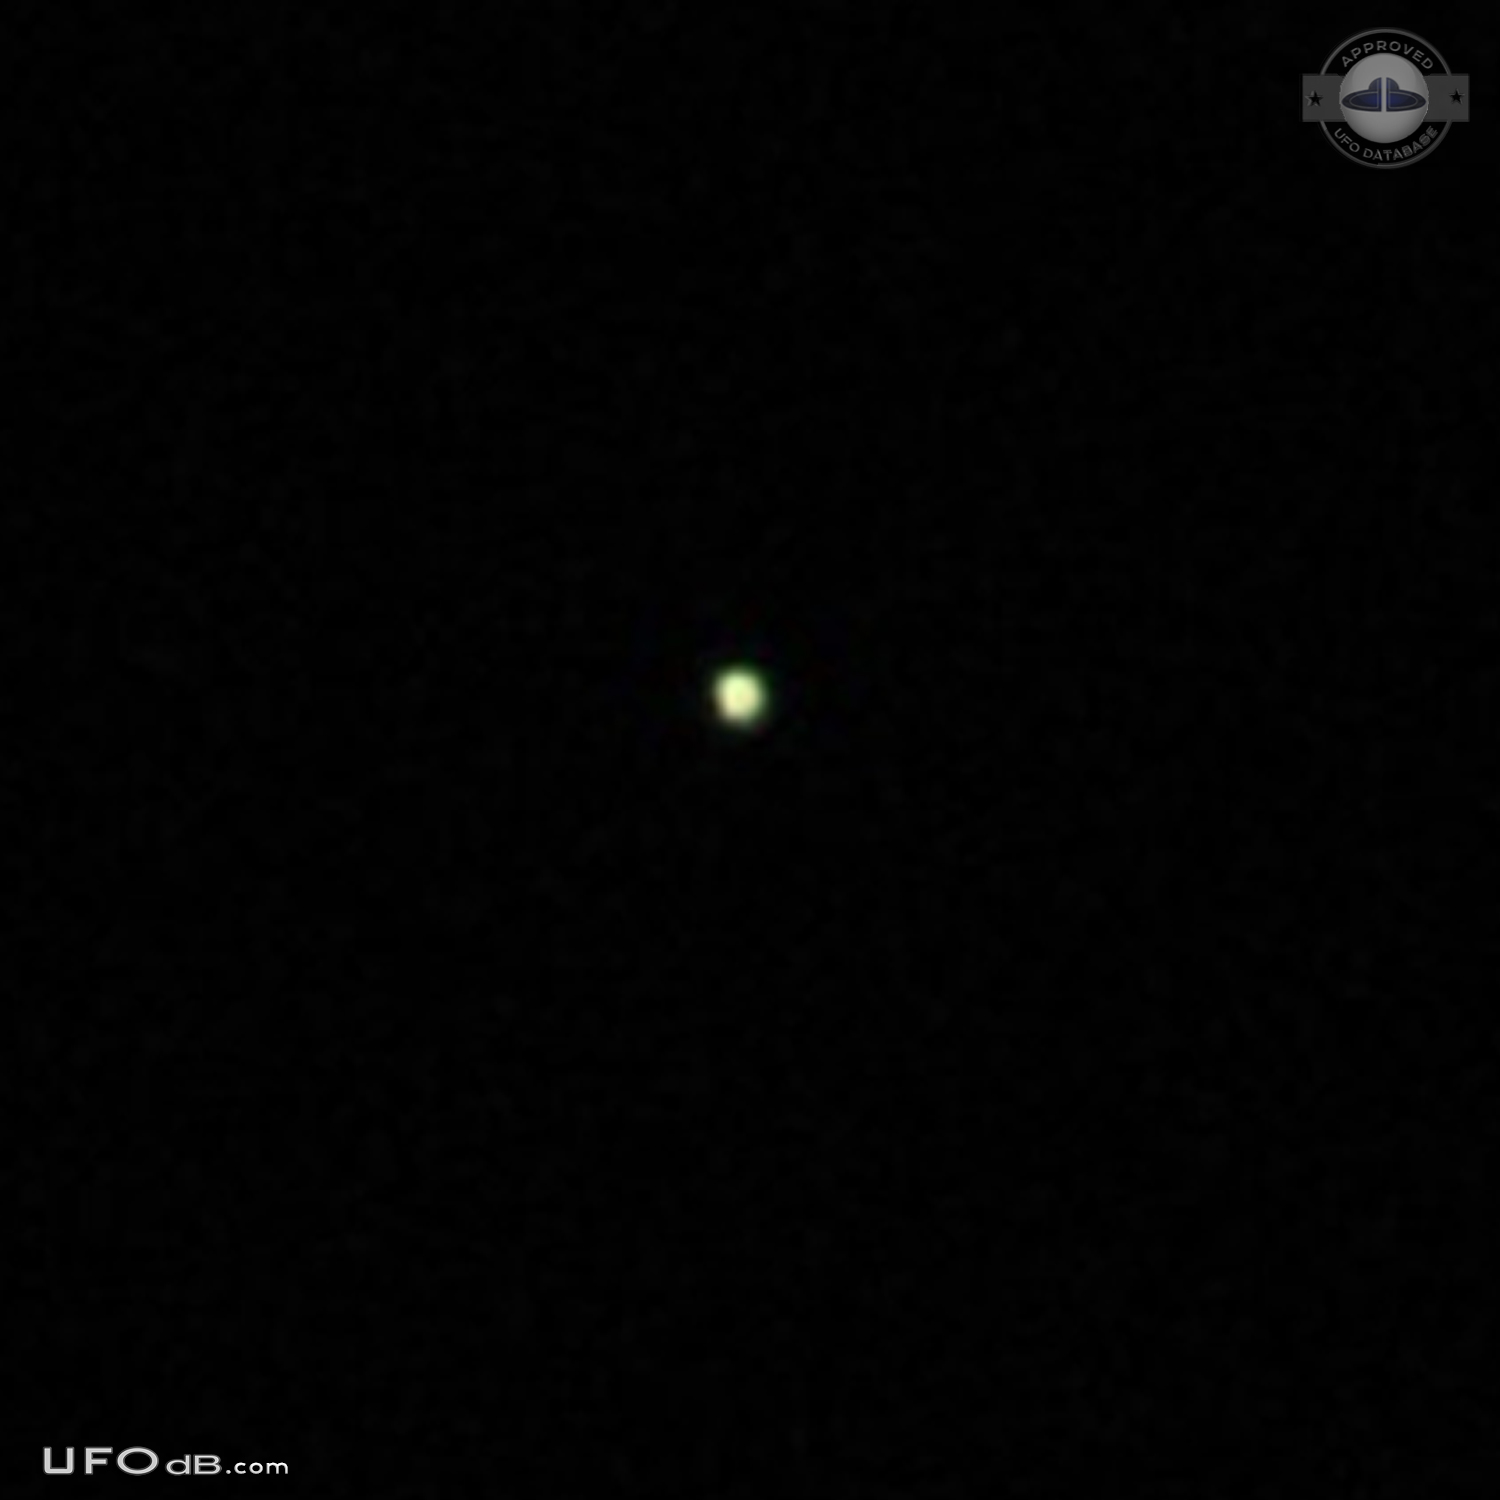 Very bright star UFO over Port Moresby, Papua New Guinea January 2015 UFO Picture #594-2